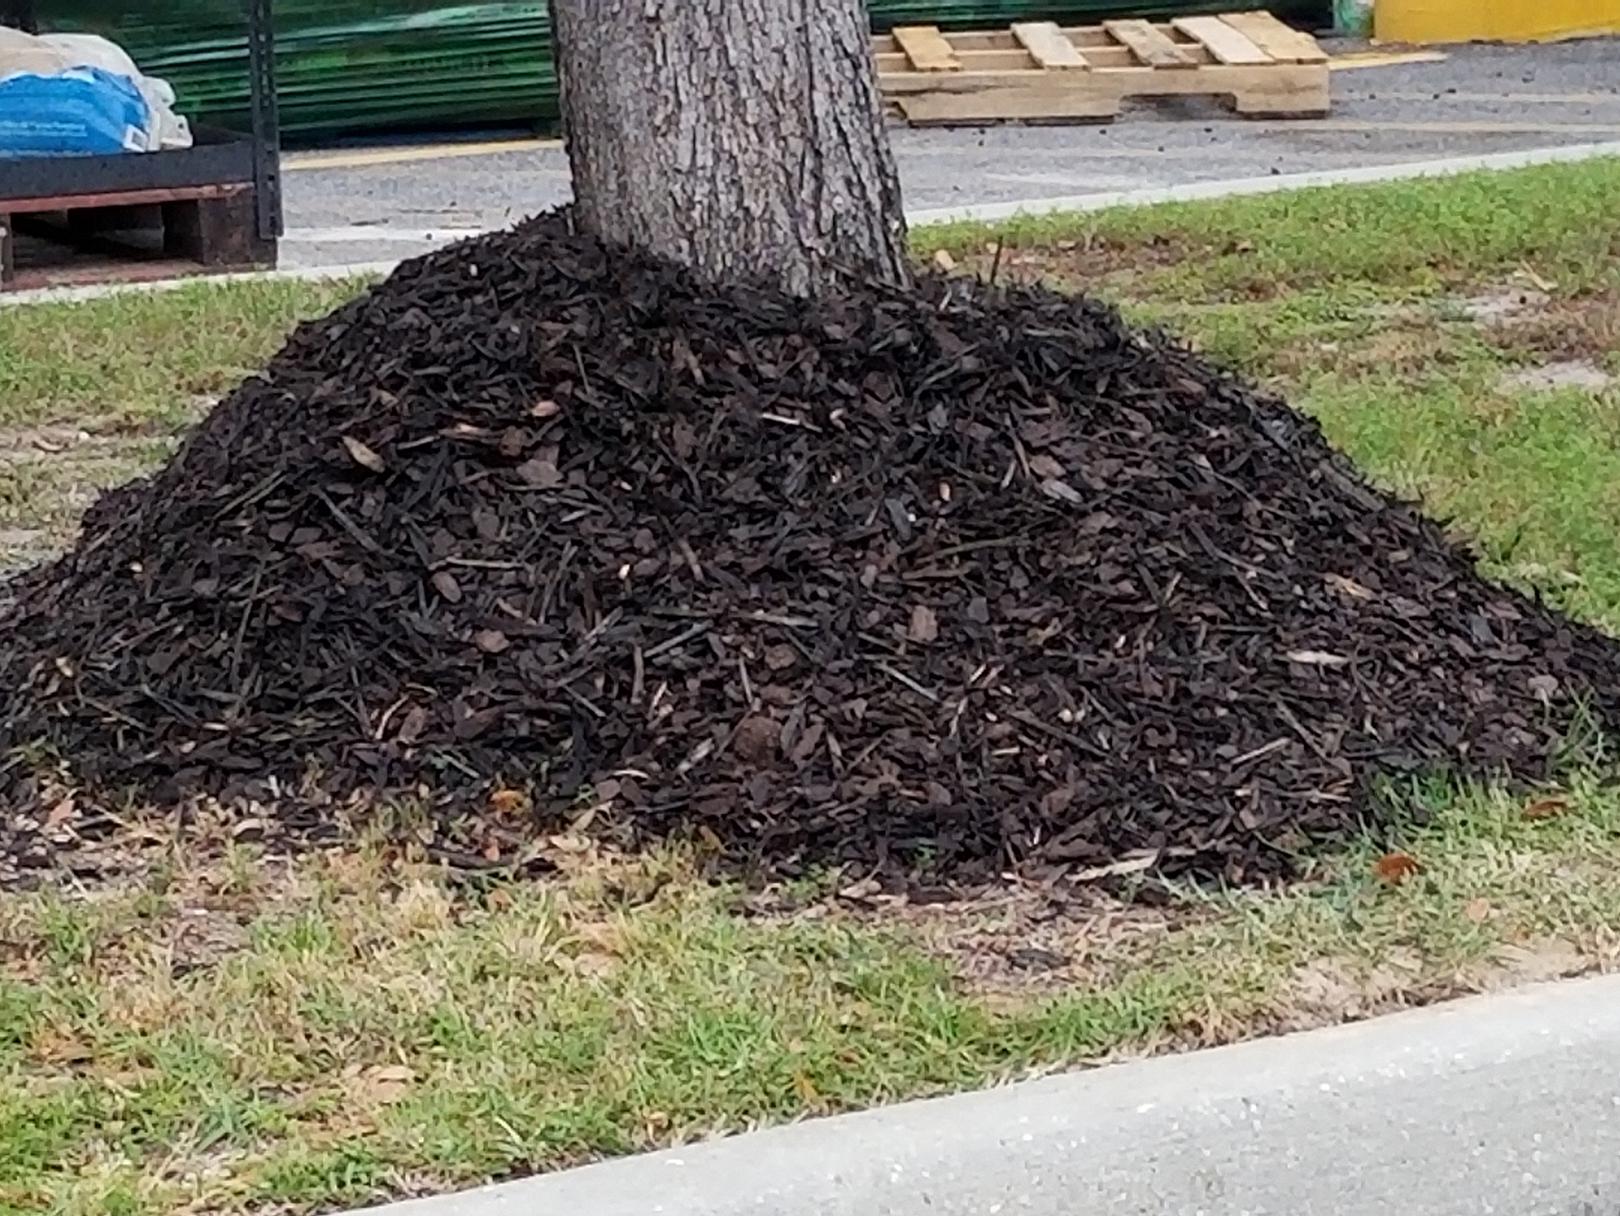 Don’t mulch trees like this. Mulching offers significant benefits, but a layer should only be 2 to 3 inches deep and pulled away from the tree trunk. (Photo by MSU Extension/Gary Bachman)